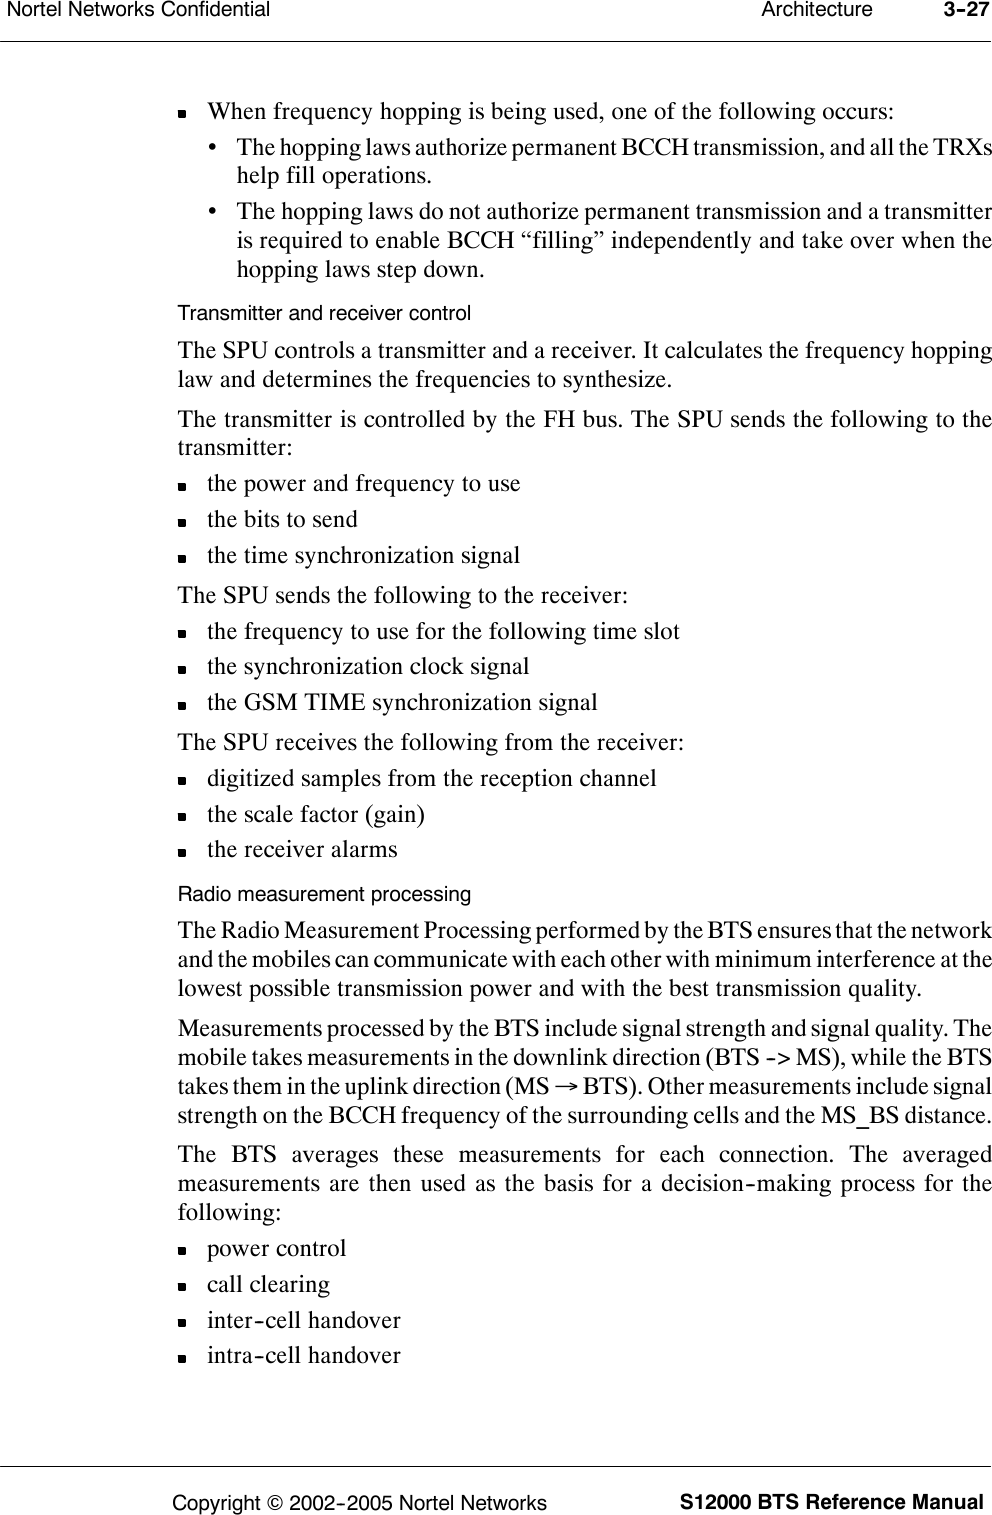 ArchitectureNortel Networks Confidential 3--27S12000 BTS Reference ManualCopyright ©2002--2005 Nortel NetworksWhen frequency hopping is being used, one of the following occurs:•The hopping laws authorize permanent BCCH transmission, and all the TRXshelp fill operations.•The hopping laws do not authorize permanent transmission and a transmitteris required to enable BCCH “filling” independently and take over when thehopping laws step down.Transmitter and receiver controlThe SPU controls a transmitter and a receiver. It calculates the frequency hoppinglaw and determines the frequencies to synthesize.The transmitter is controlled by the FH bus. The SPU sends the following to thetransmitter:the power and frequency to usethe bits to sendthe time synchronization signalThe SPU sends the following to the receiver:the frequency to use for the following time slotthe synchronization clock signalthe GSM TIME synchronization signalThe SPU receives the following from the receiver:digitized samples from the reception channelthe scale factor (gain)the receiver alarmsRadio measurement processingThe Radio Measurement Processing performed by the BTS ensures that the networkand the mobiles can communicate with each other with minimum interference at thelowest possible transmission power and with the best transmission quality.Measurements processed by the BTS include signal strength and signal quality. Themobile takes measurements in the downlink direction (BTS --&gt; MS), while the BTStakes them in the uplink direction (MS →BTS). Other measurements include signalstrength on the BCCH frequency of the surrounding cells and the MS_BS distance.The BTS averages these measurements for each connection. The averagedmeasurements are then used as the basis for a decision--making process for thefollowing:power controlcall clearinginter--cell handoverintra--cell handover